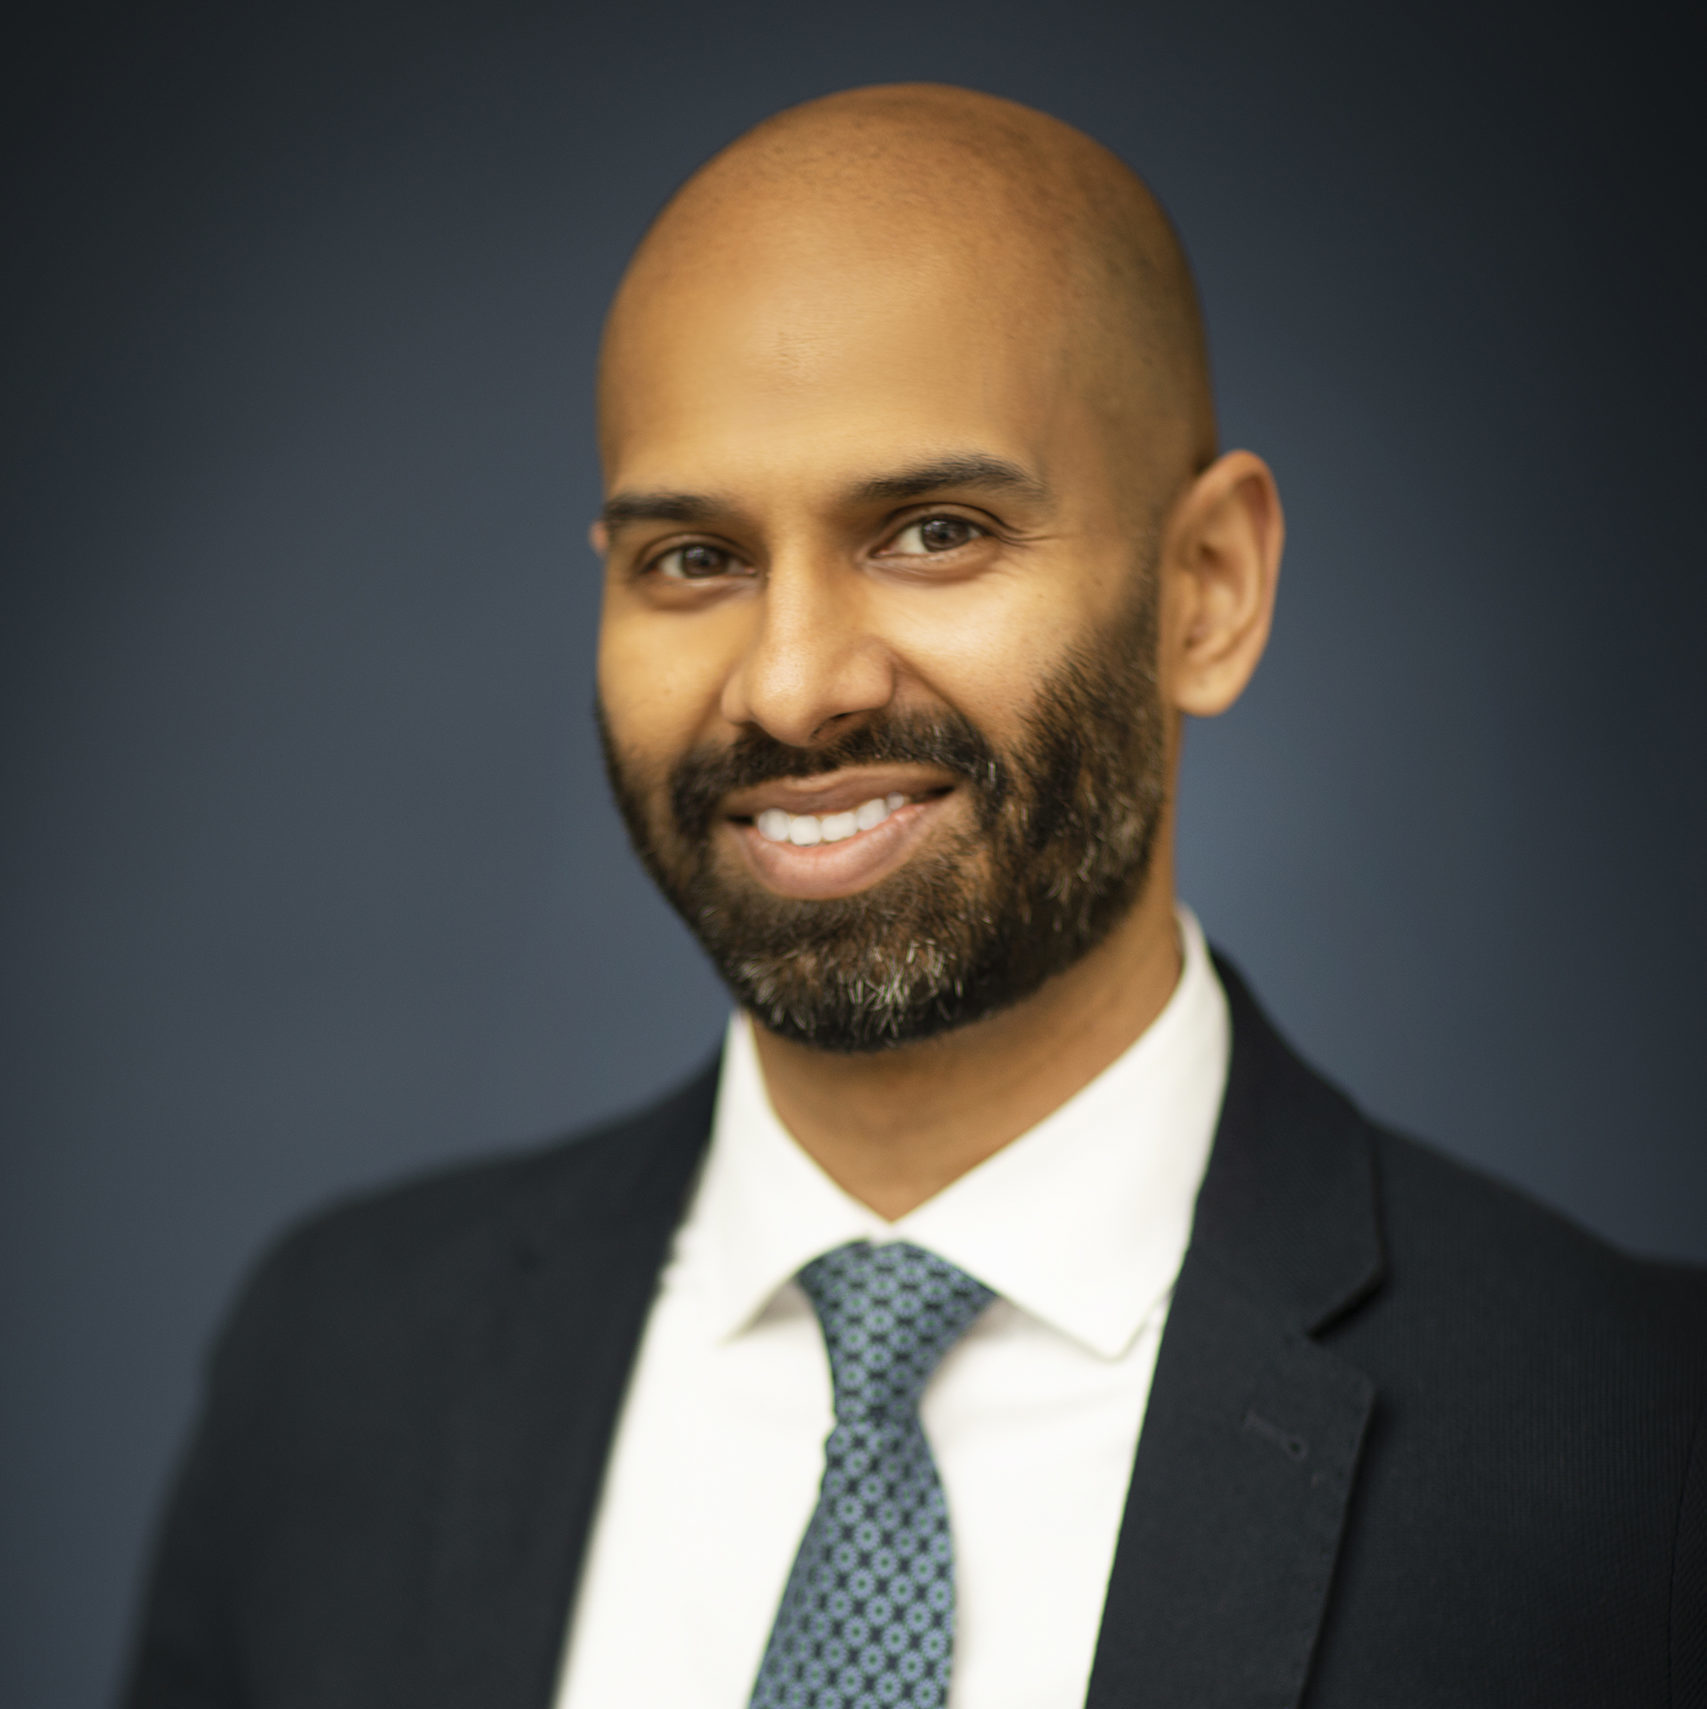 Photo of Shaun Dias wearing a suit and tie in front of a black background